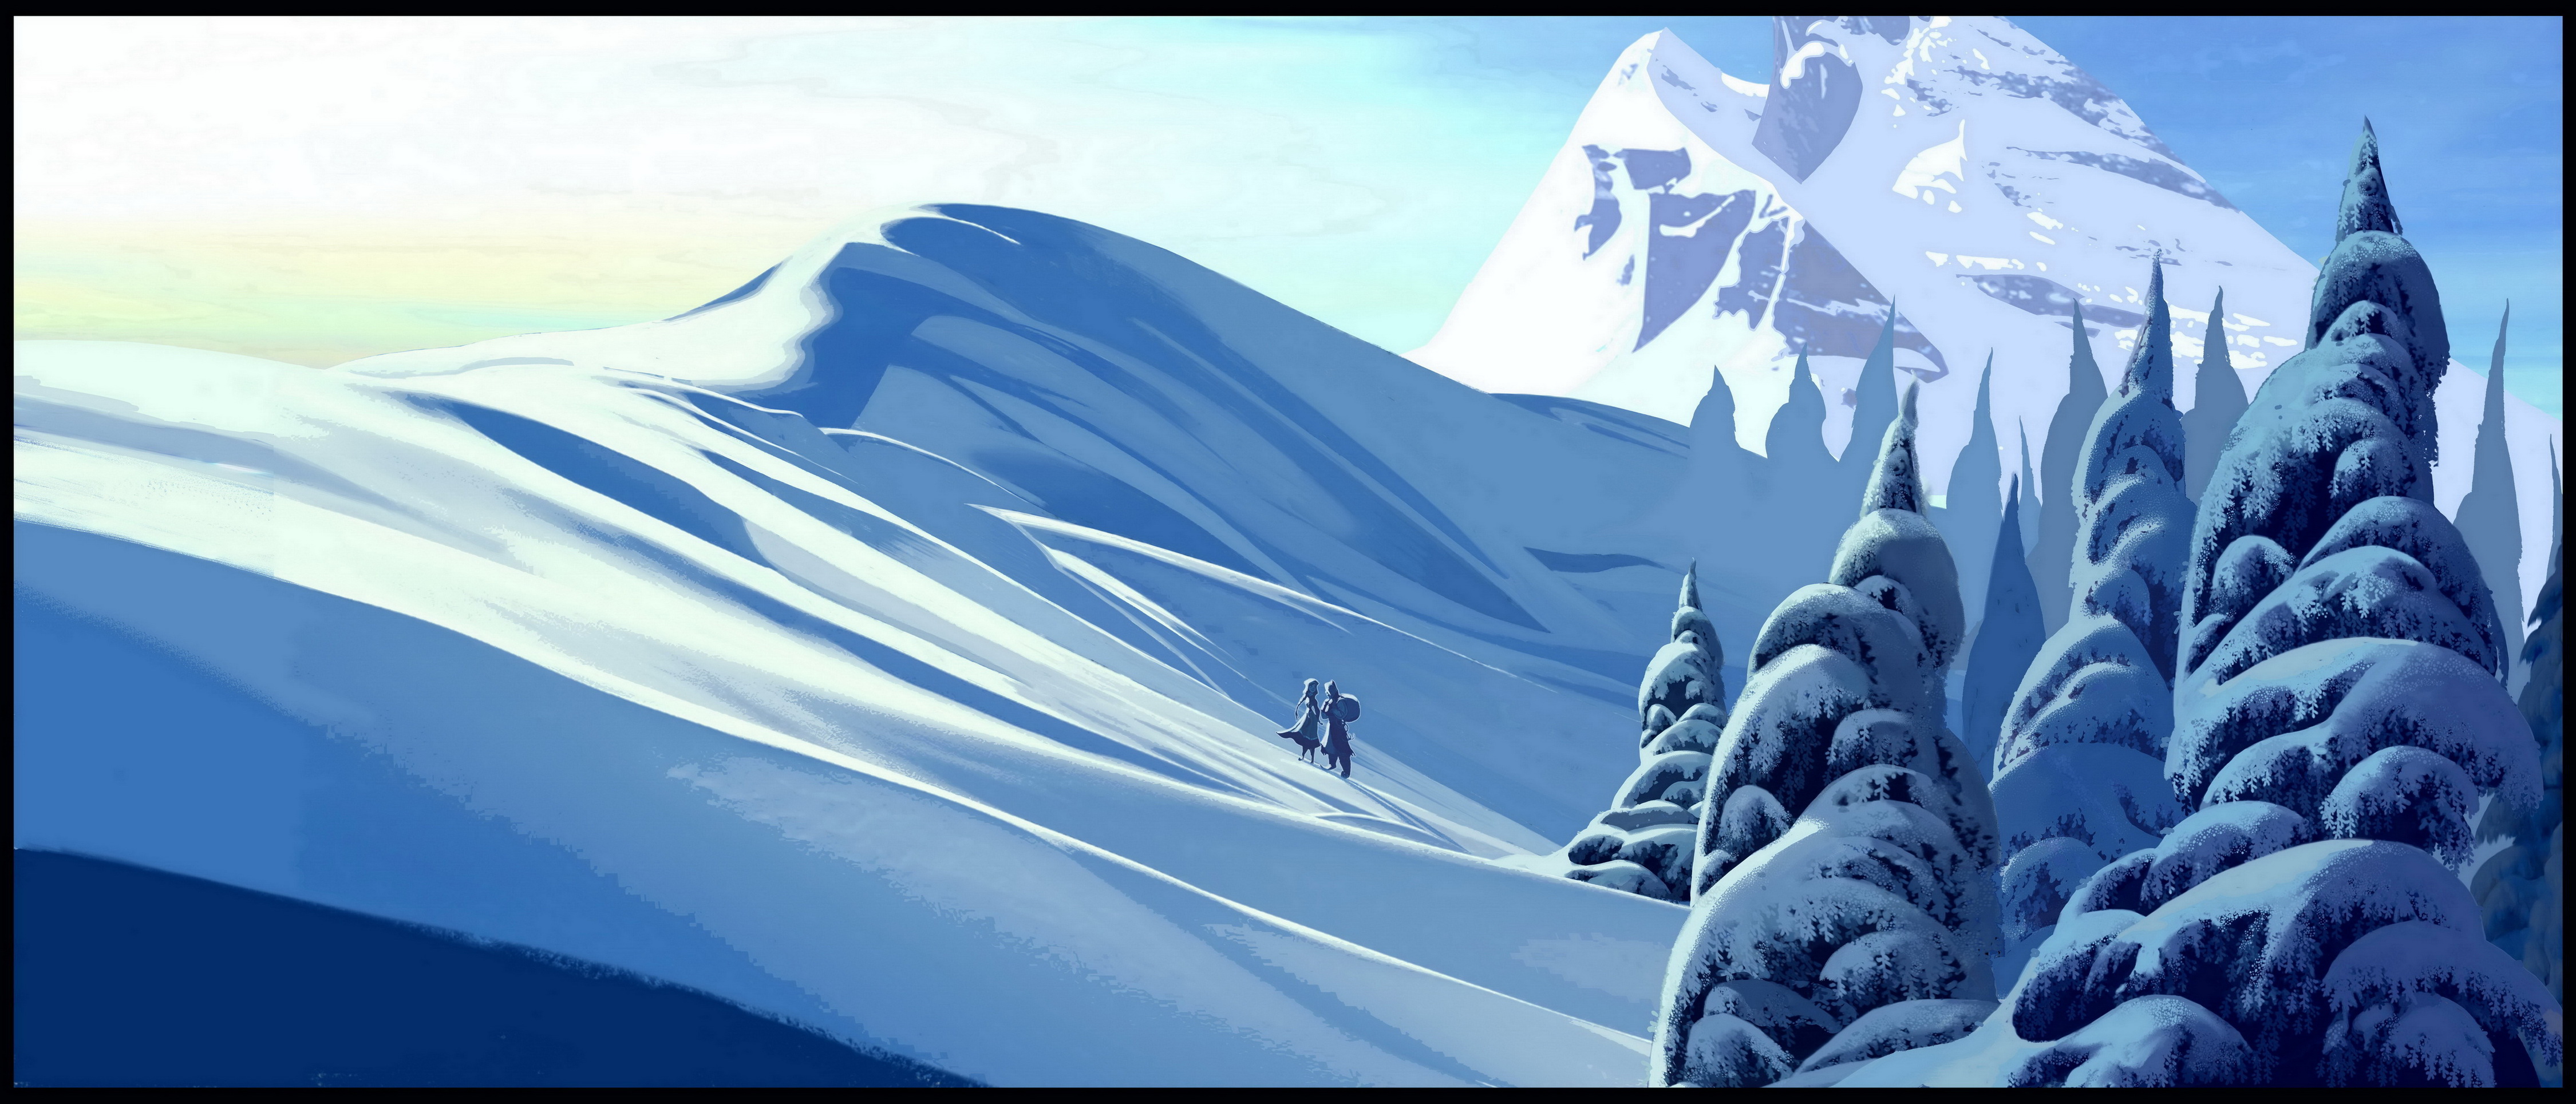 "FROZEN" concept art. ©2013 Disney. All Rights Reserved.